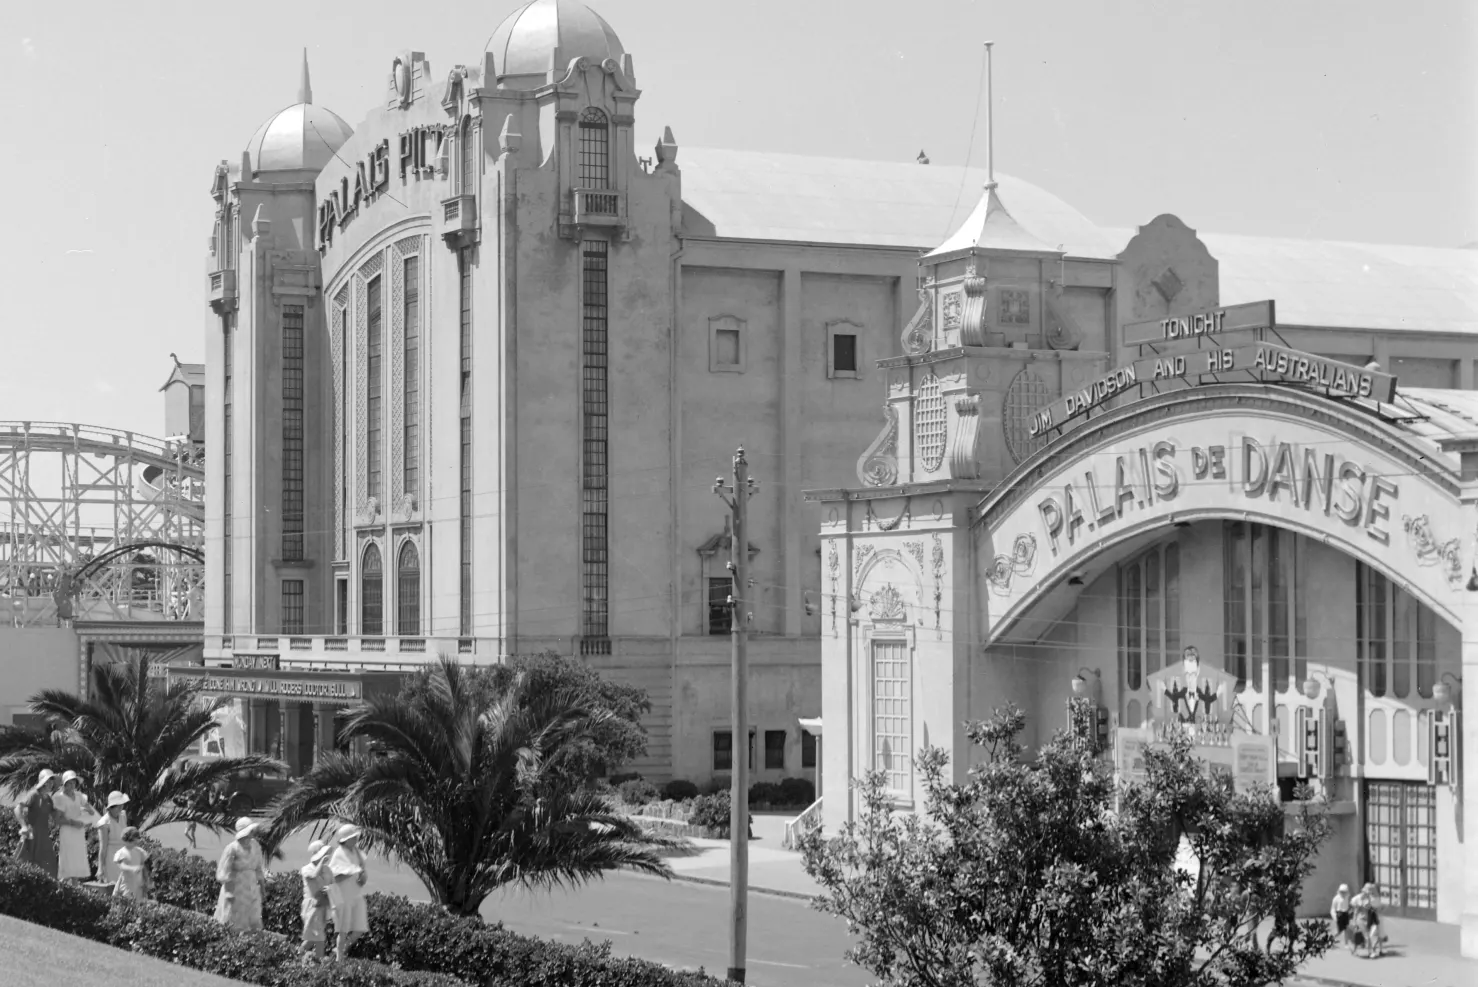 Palais Theatre (left) and the Palais de Danse, circa 1934.CREDIT:STATE LIBRARY OF VICTORIA